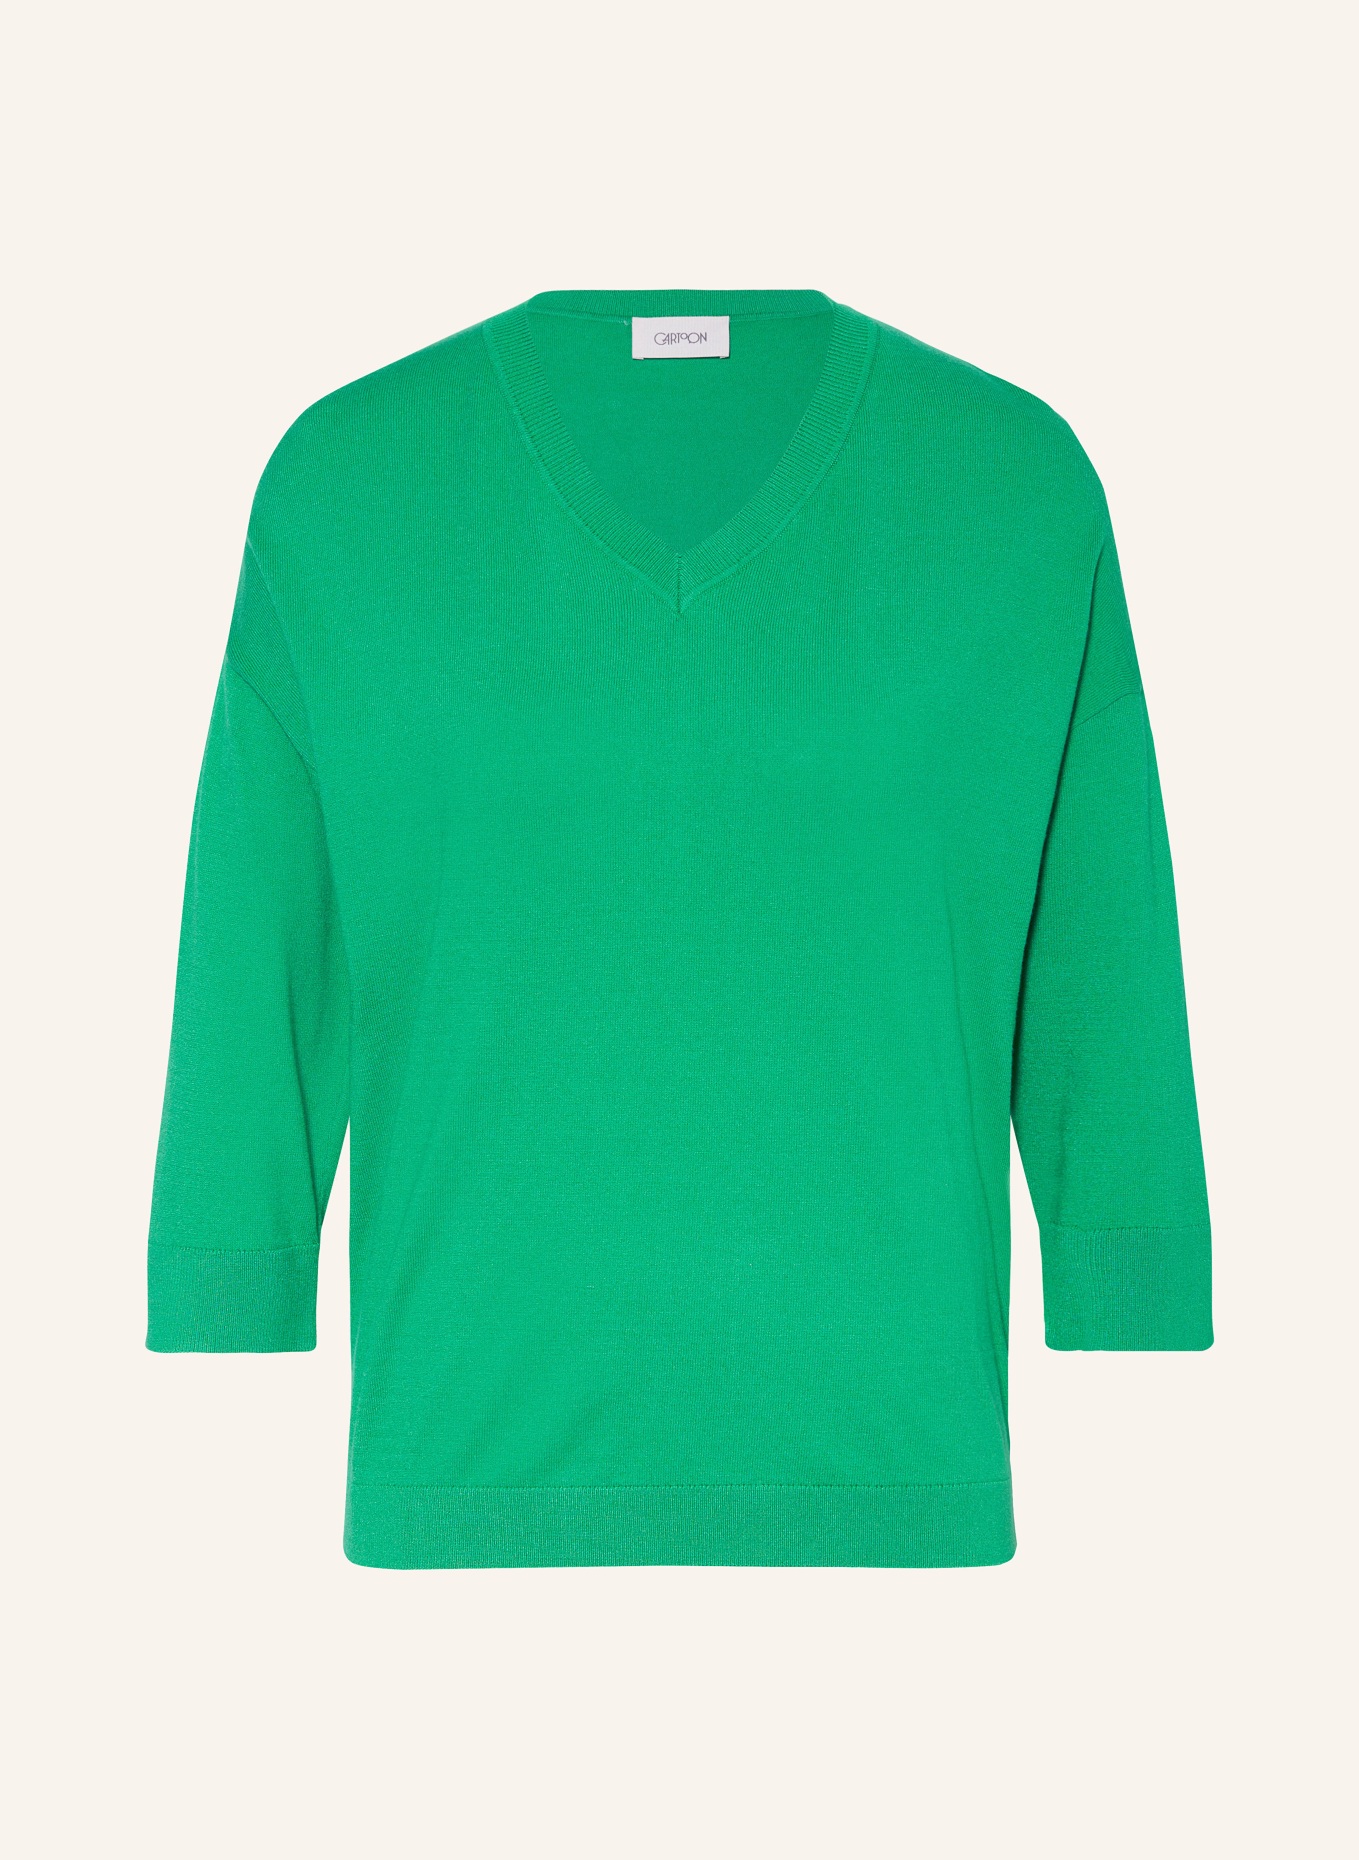 CARTOON Knit shirt with 3/4 sleeves, Color: GREEN (Image 1)